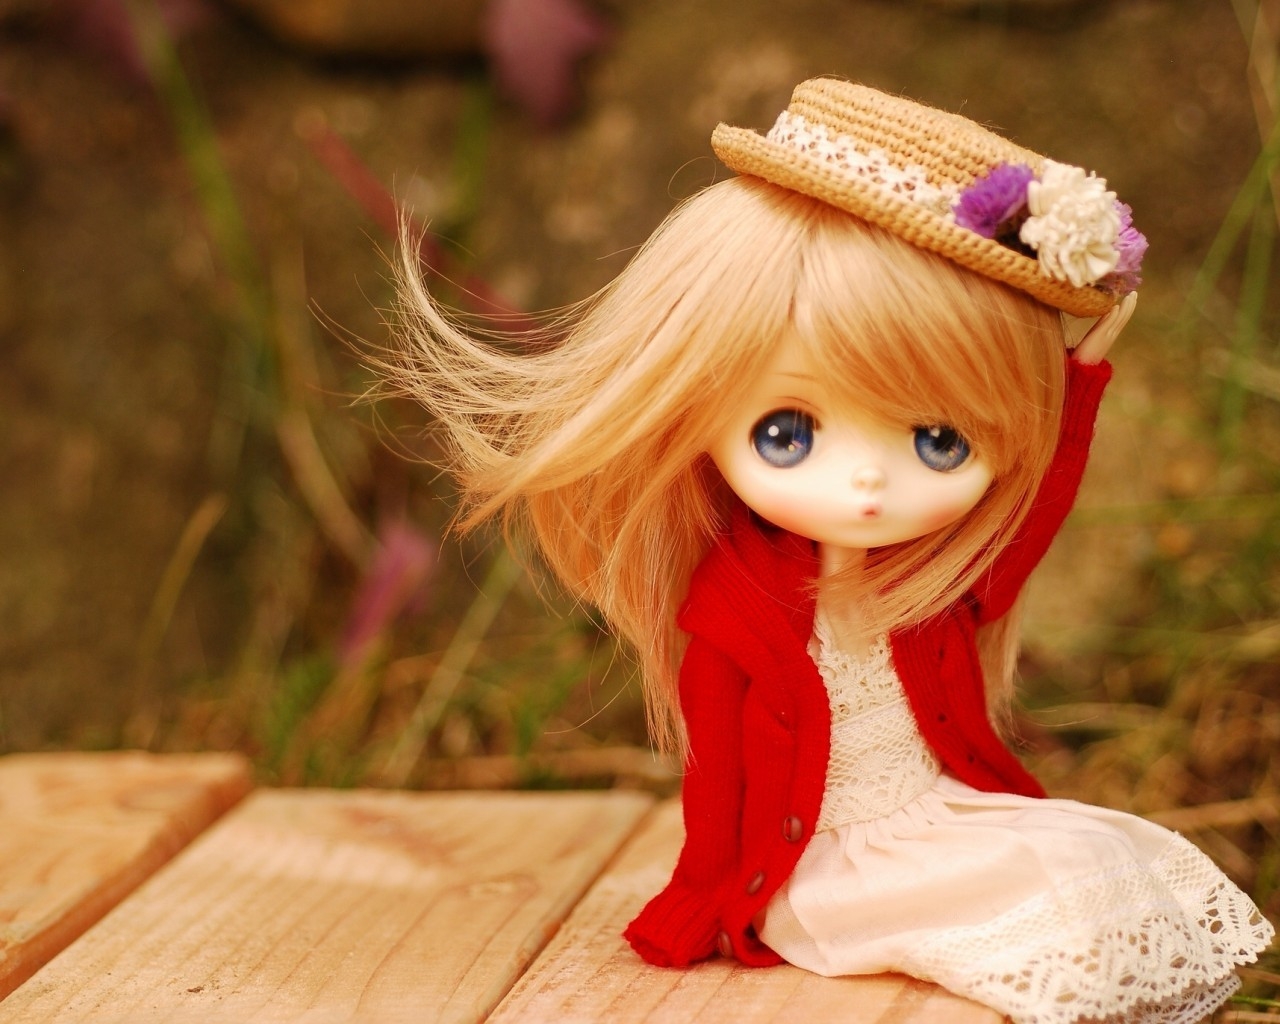 Cute Little Doll for 1280 x 1024 resolution